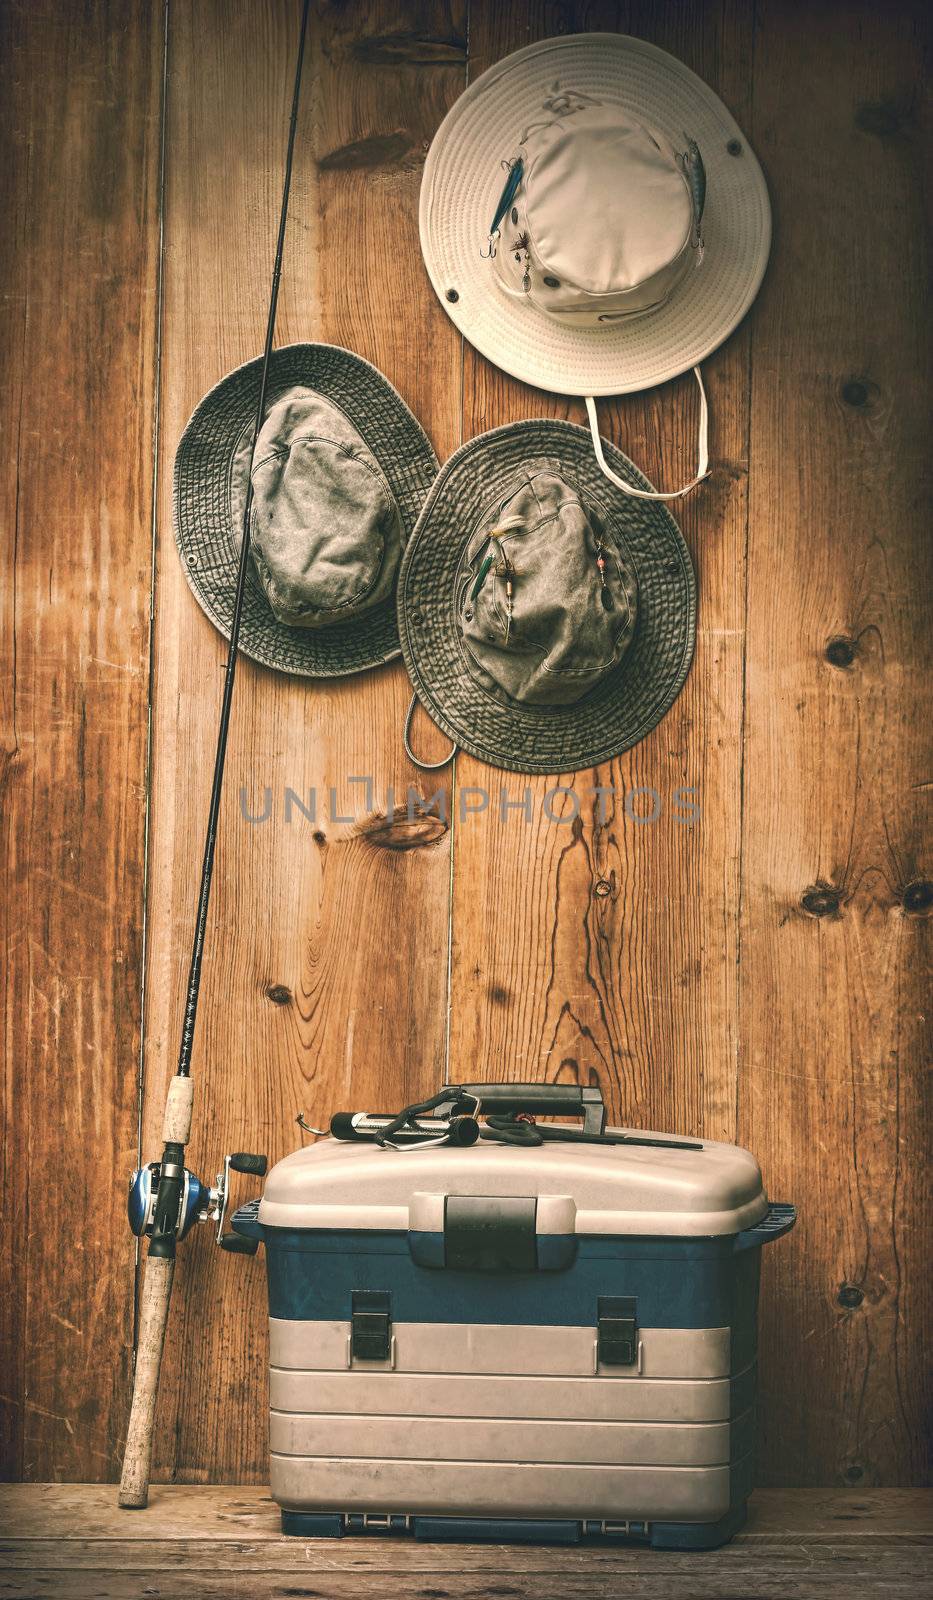 Hats hanging on wall with fishing equipment by Sandralise